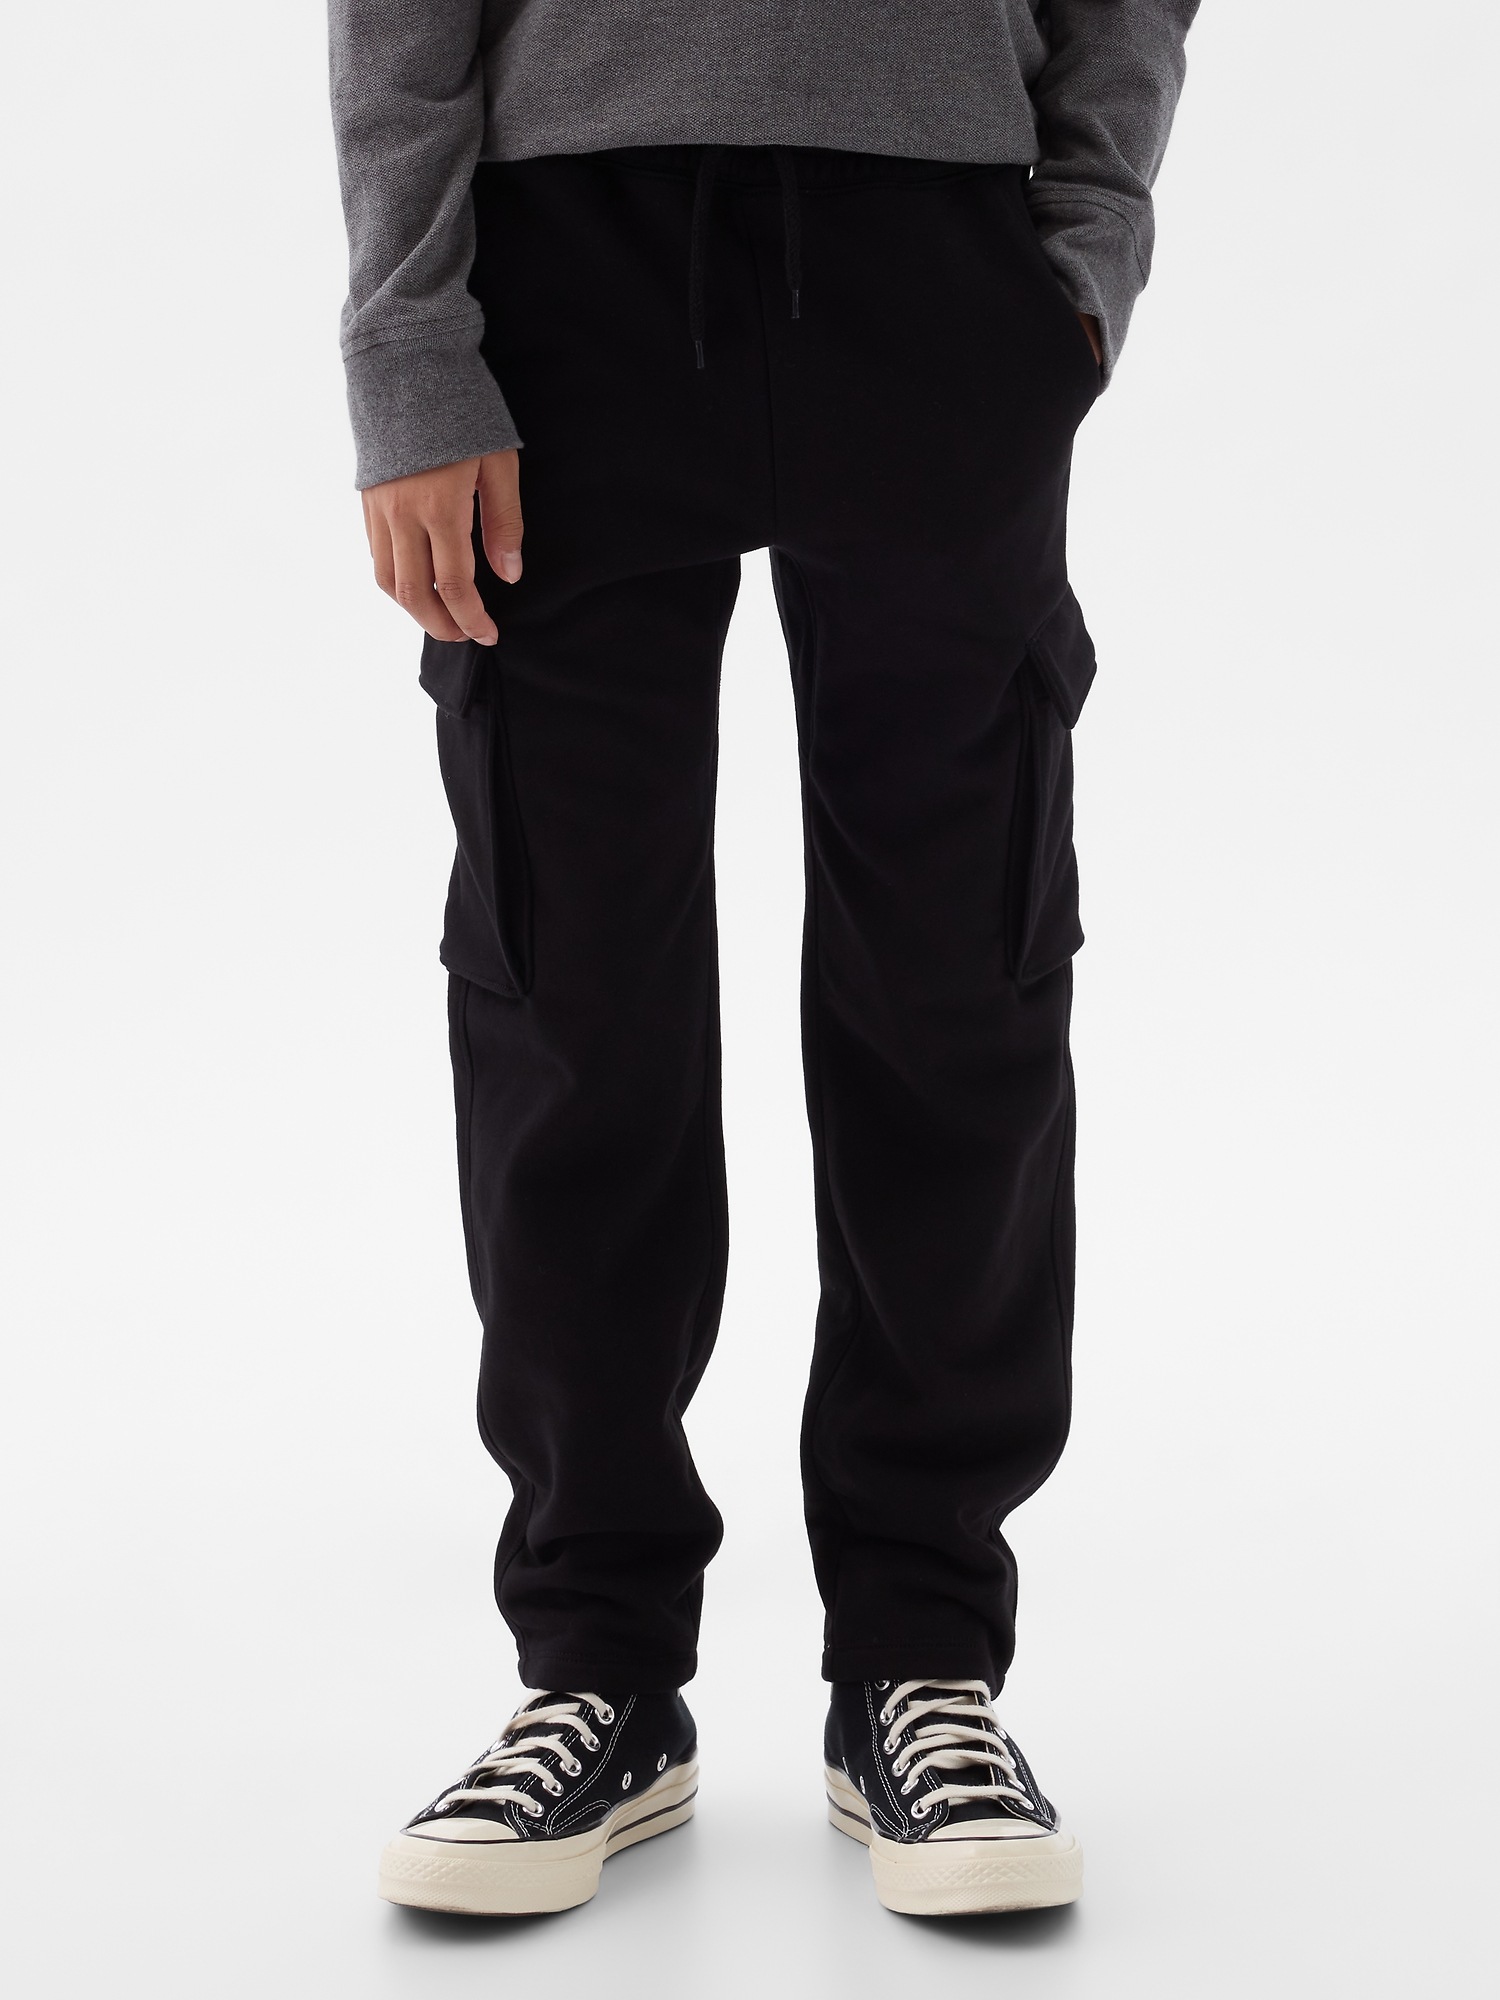 Hollywork Children's cargo trousers with big pockets:: for sale at